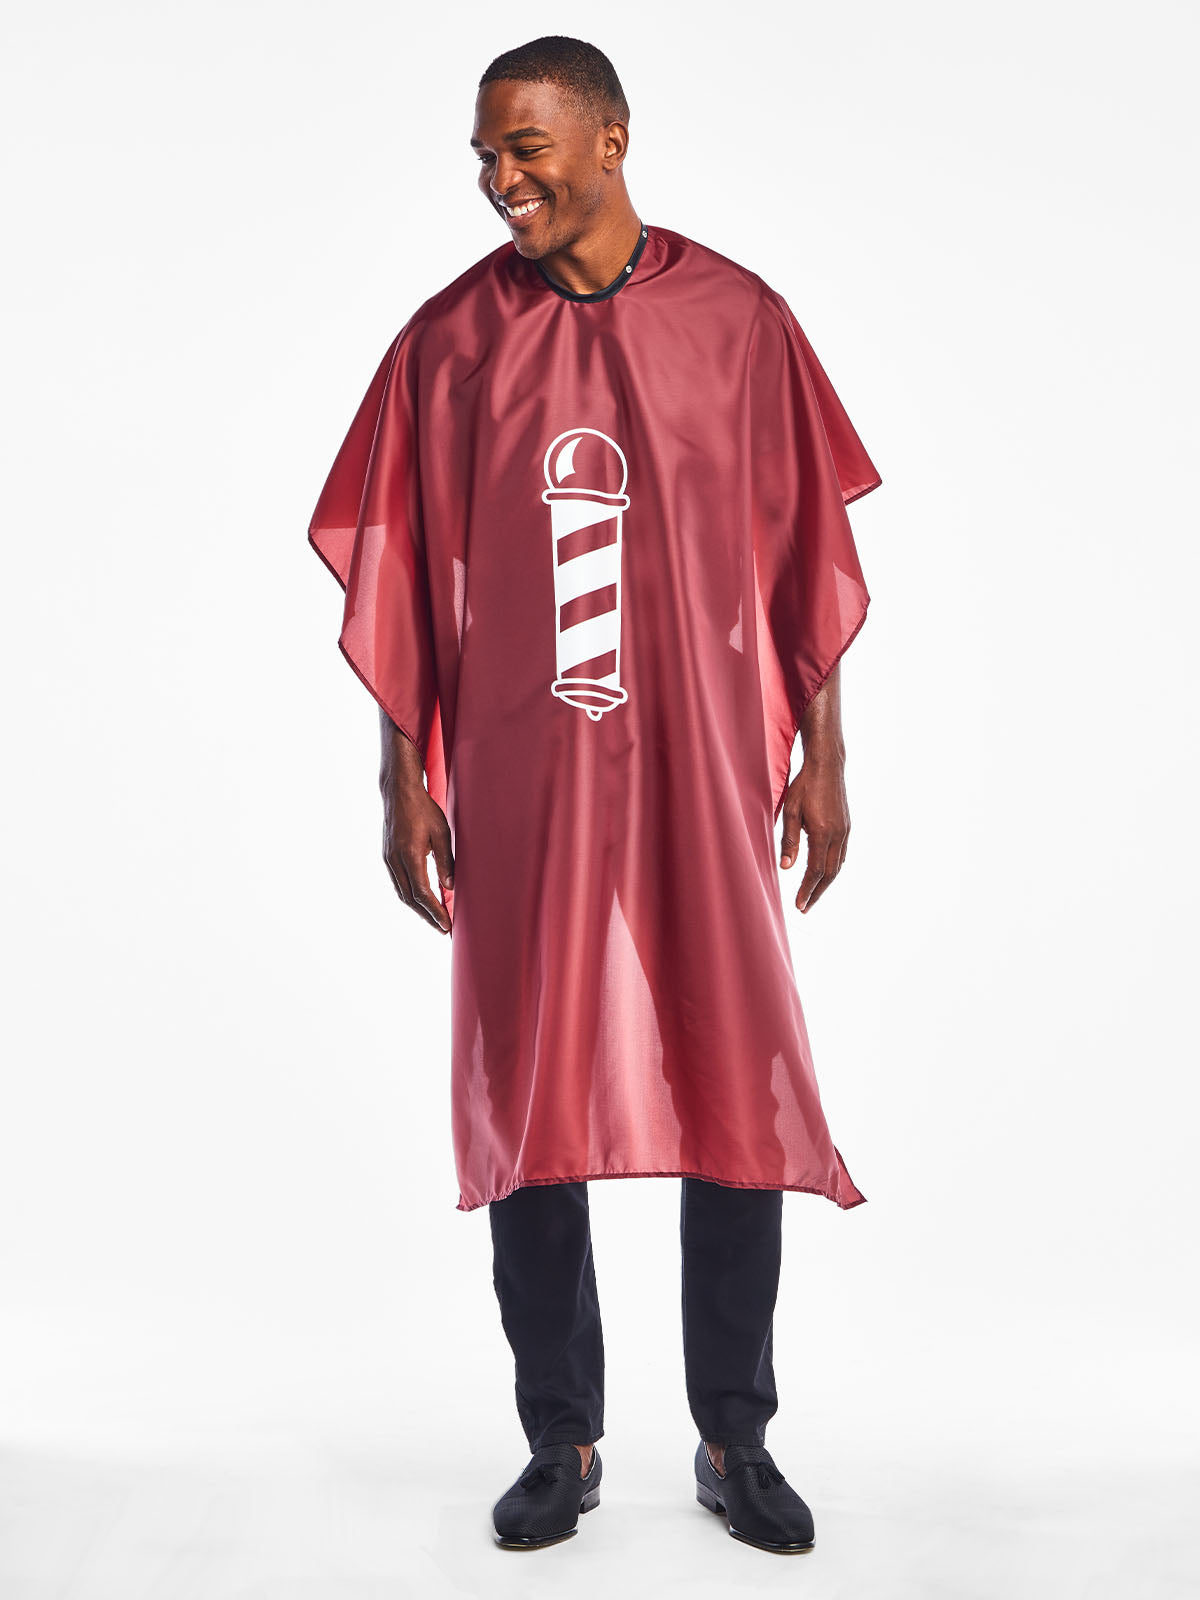 Barber Pole Styling Cape